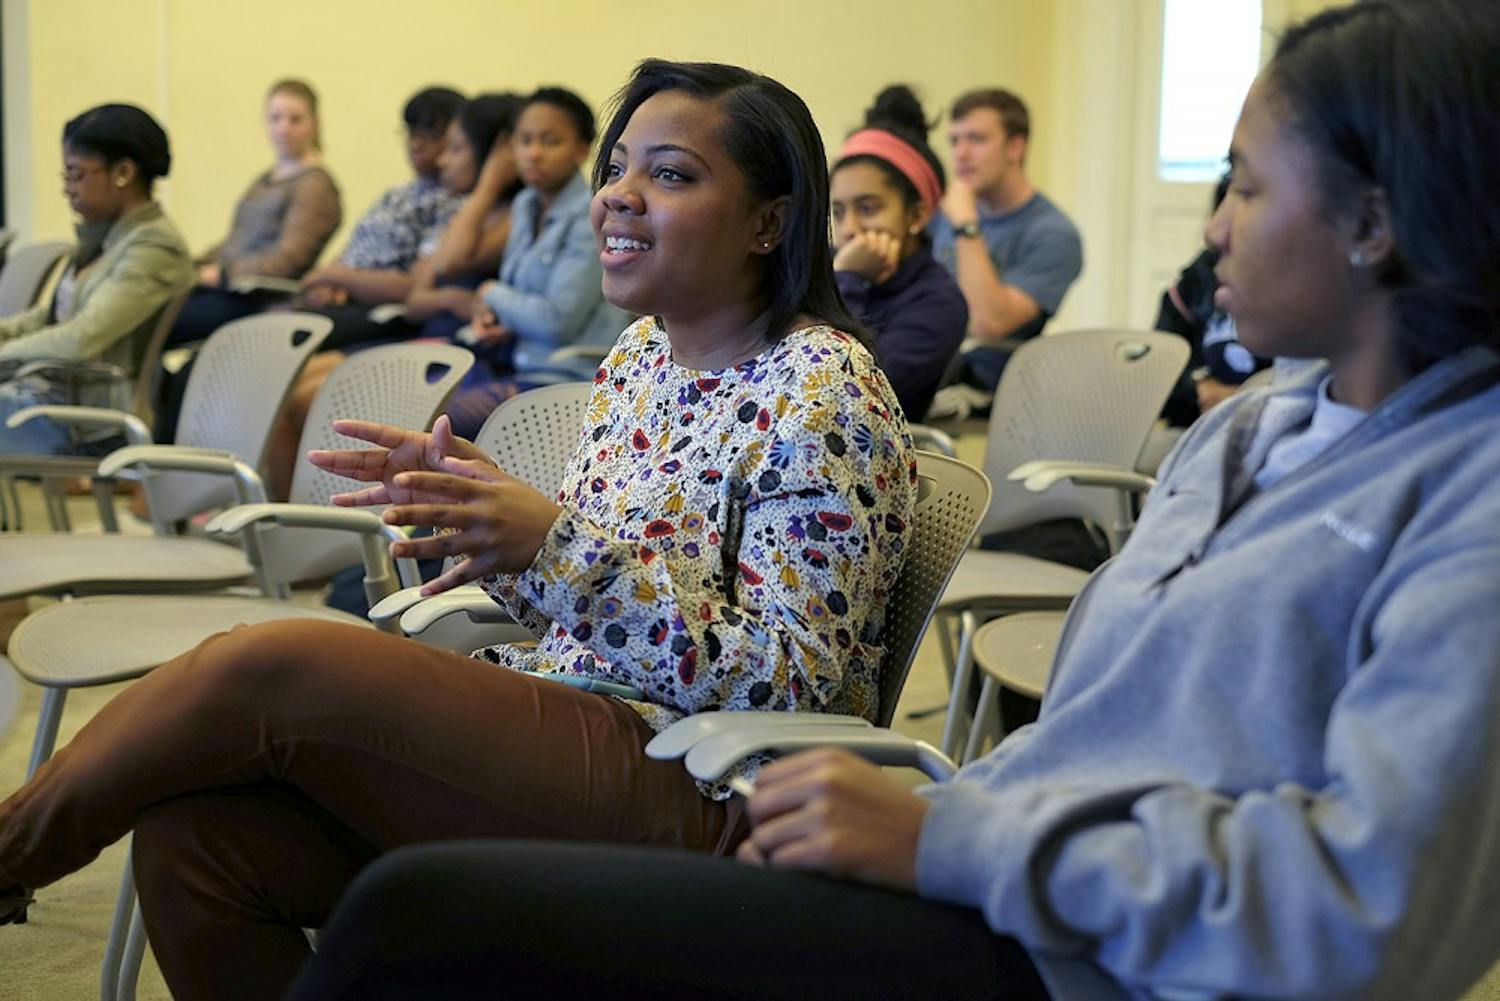 (From left to right) Asia Gandy, and Joia Freeman share their experiences with the attendees of the Token Black Girl Event Wednesday afternoon.  